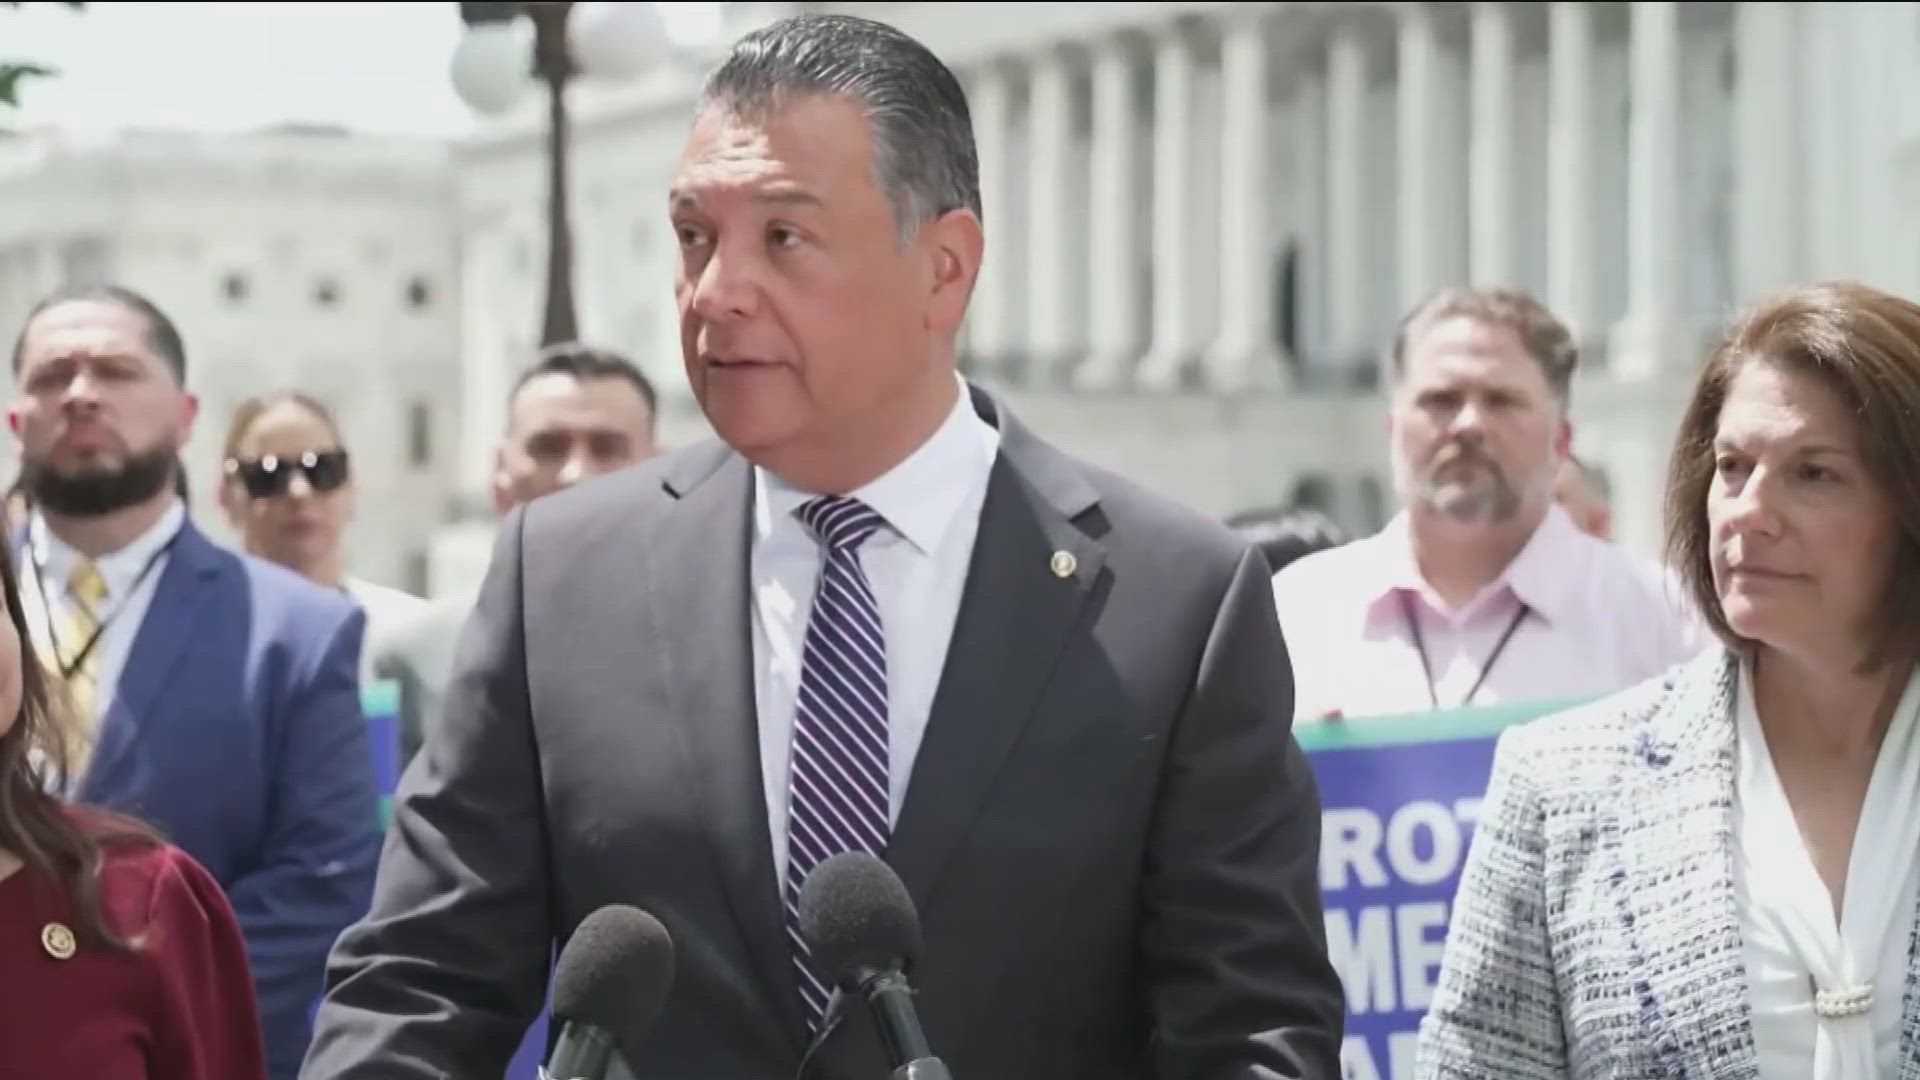 Sen. Padilla called on President Biden to streamline a path to citizenship for undocumented immigrants who have lived in the United States for a long period of time.